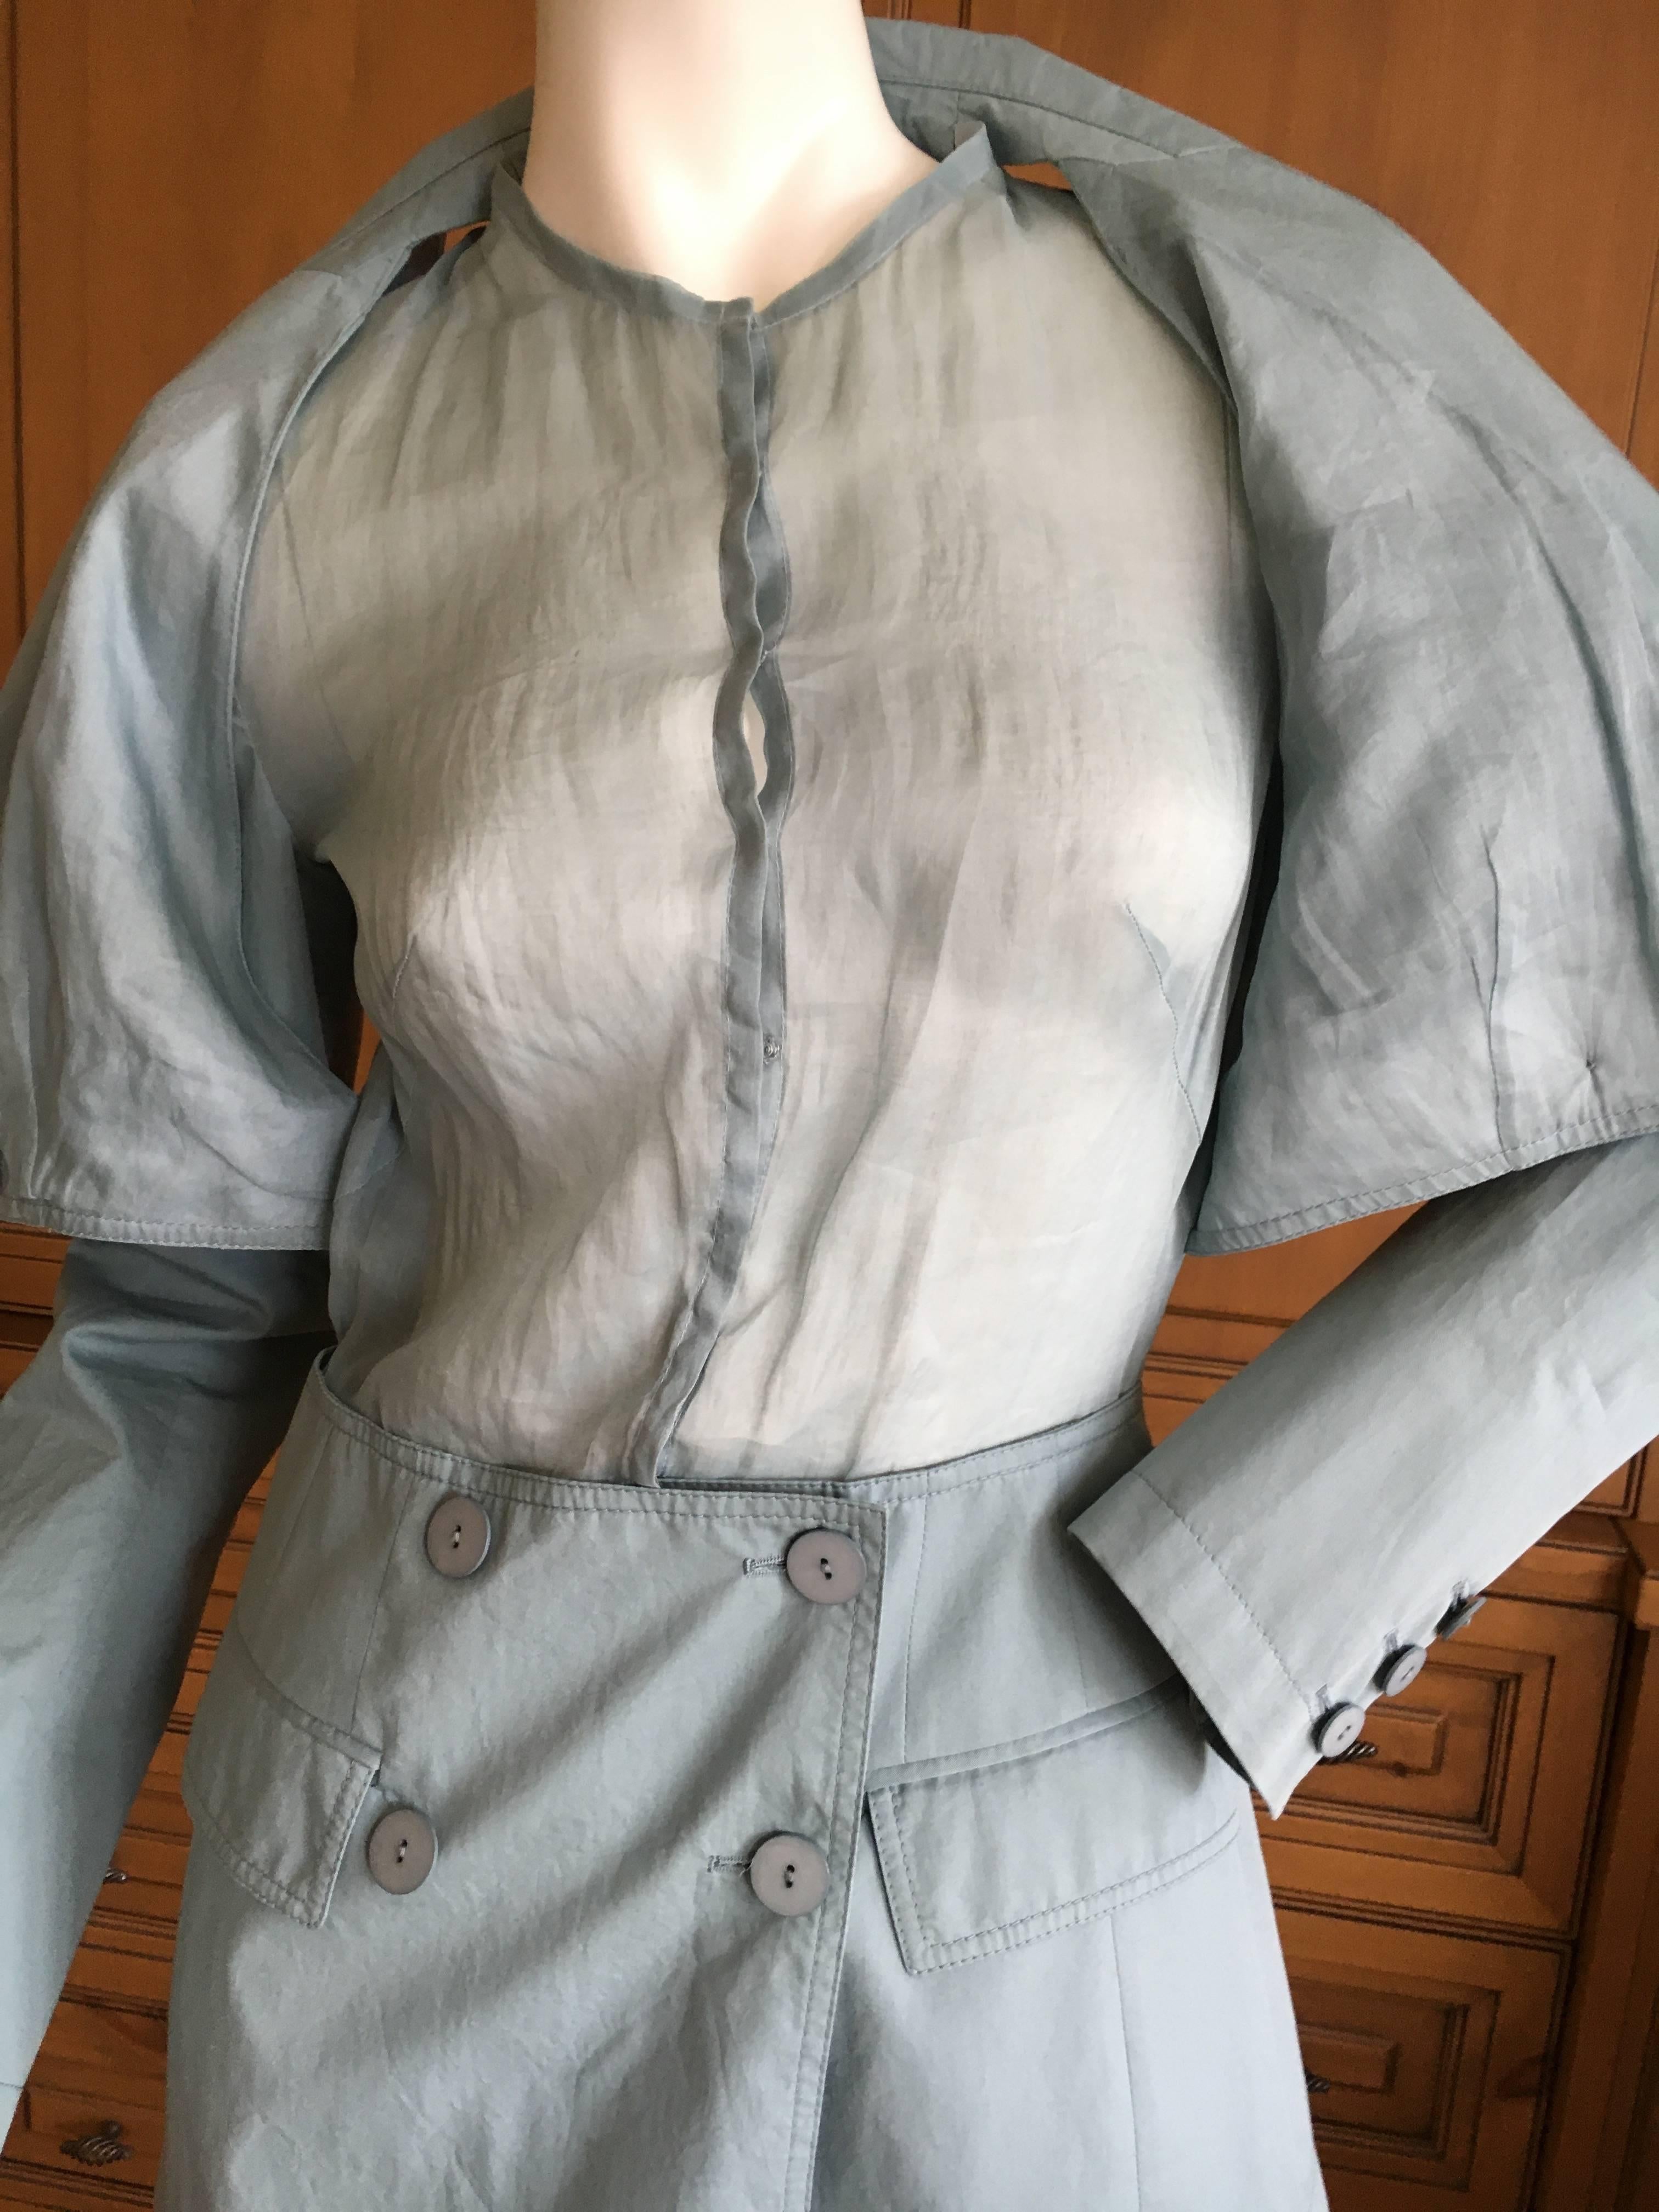 Jean Paul Gaultier Femme Vintage Sheer Inserts Light Blue Blazer.
Wonderful piece, the sheer sections don't read well on the photo's , much better in person.
Size 36
Bust 38"
Waist 30"
Length 29"
Excellent condition